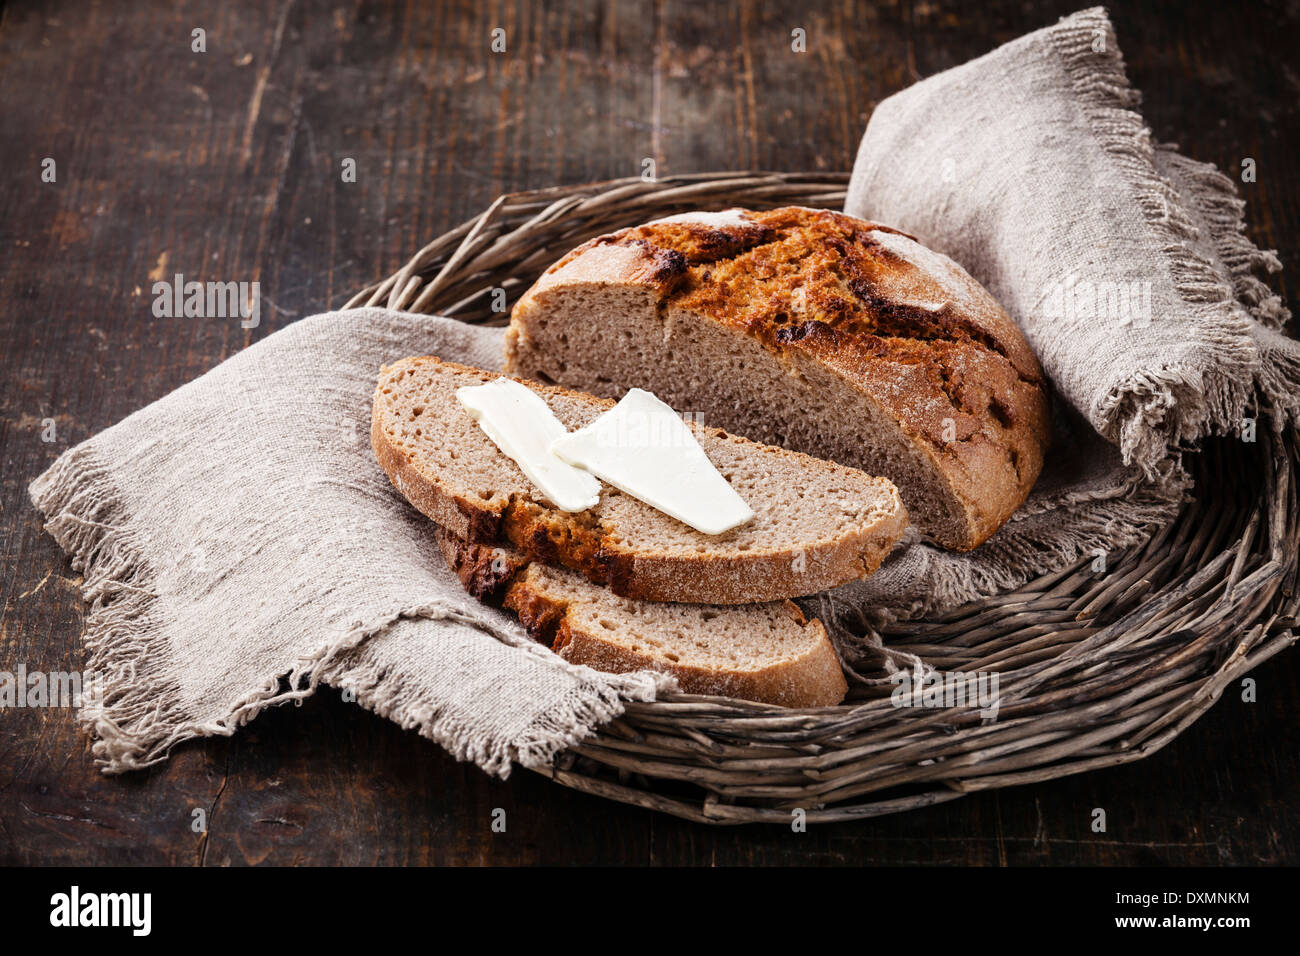 Rye bread and butter on wooden table Stock Photo